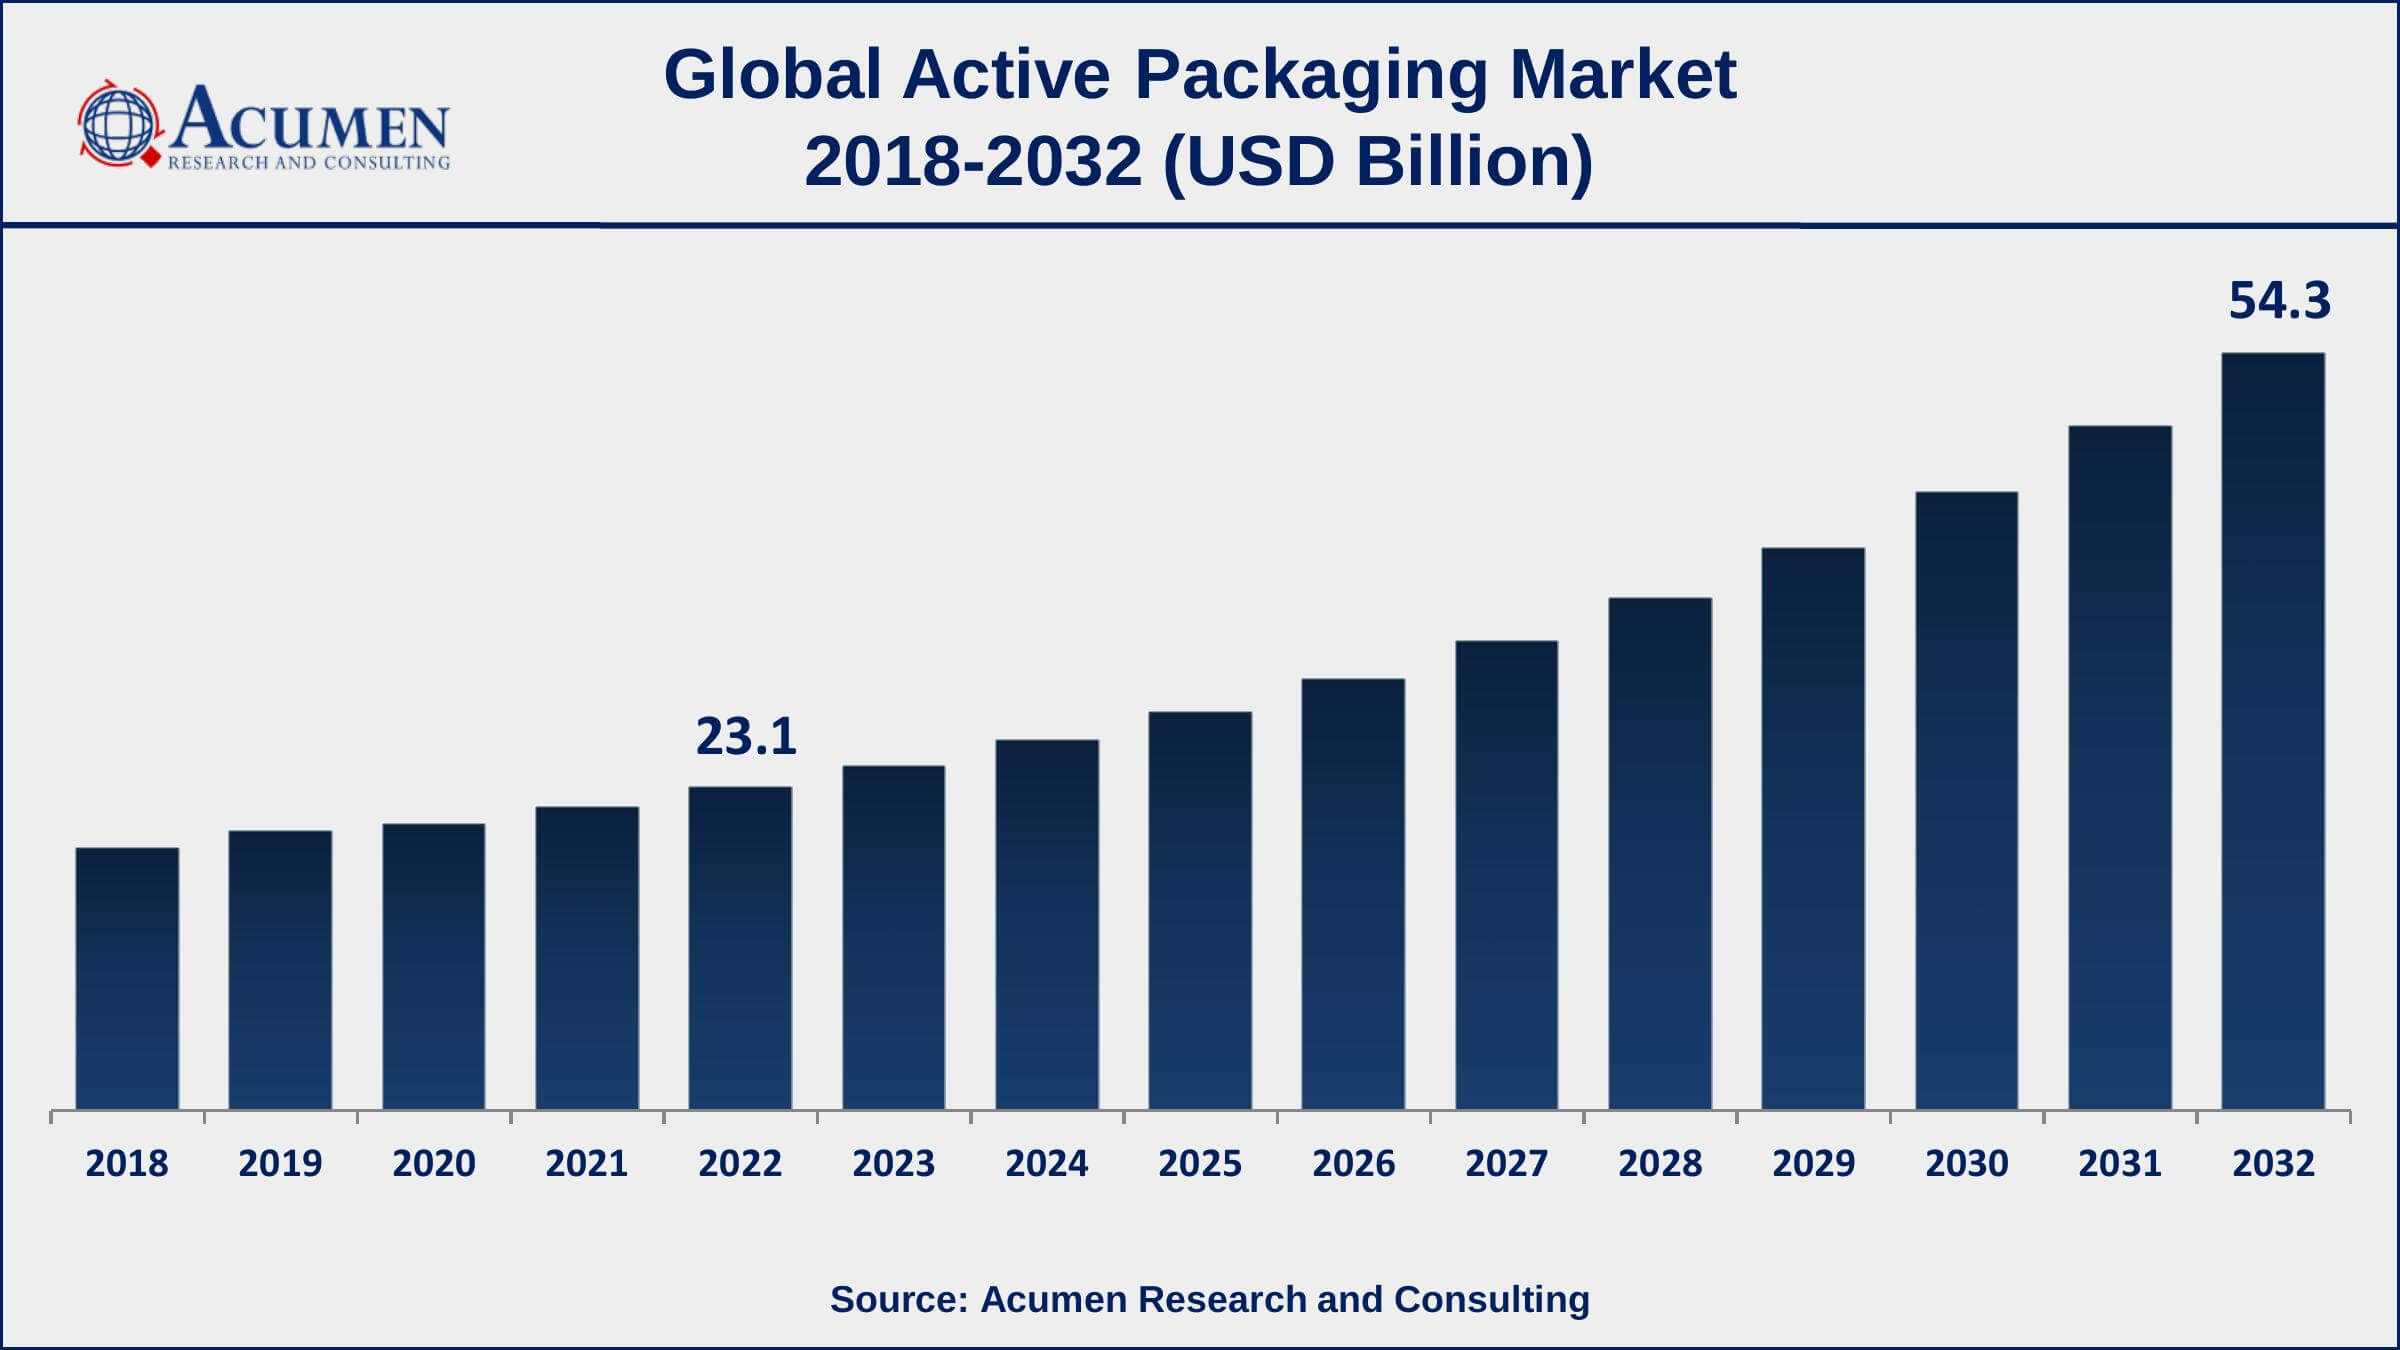 Active Packaging Market Drivers